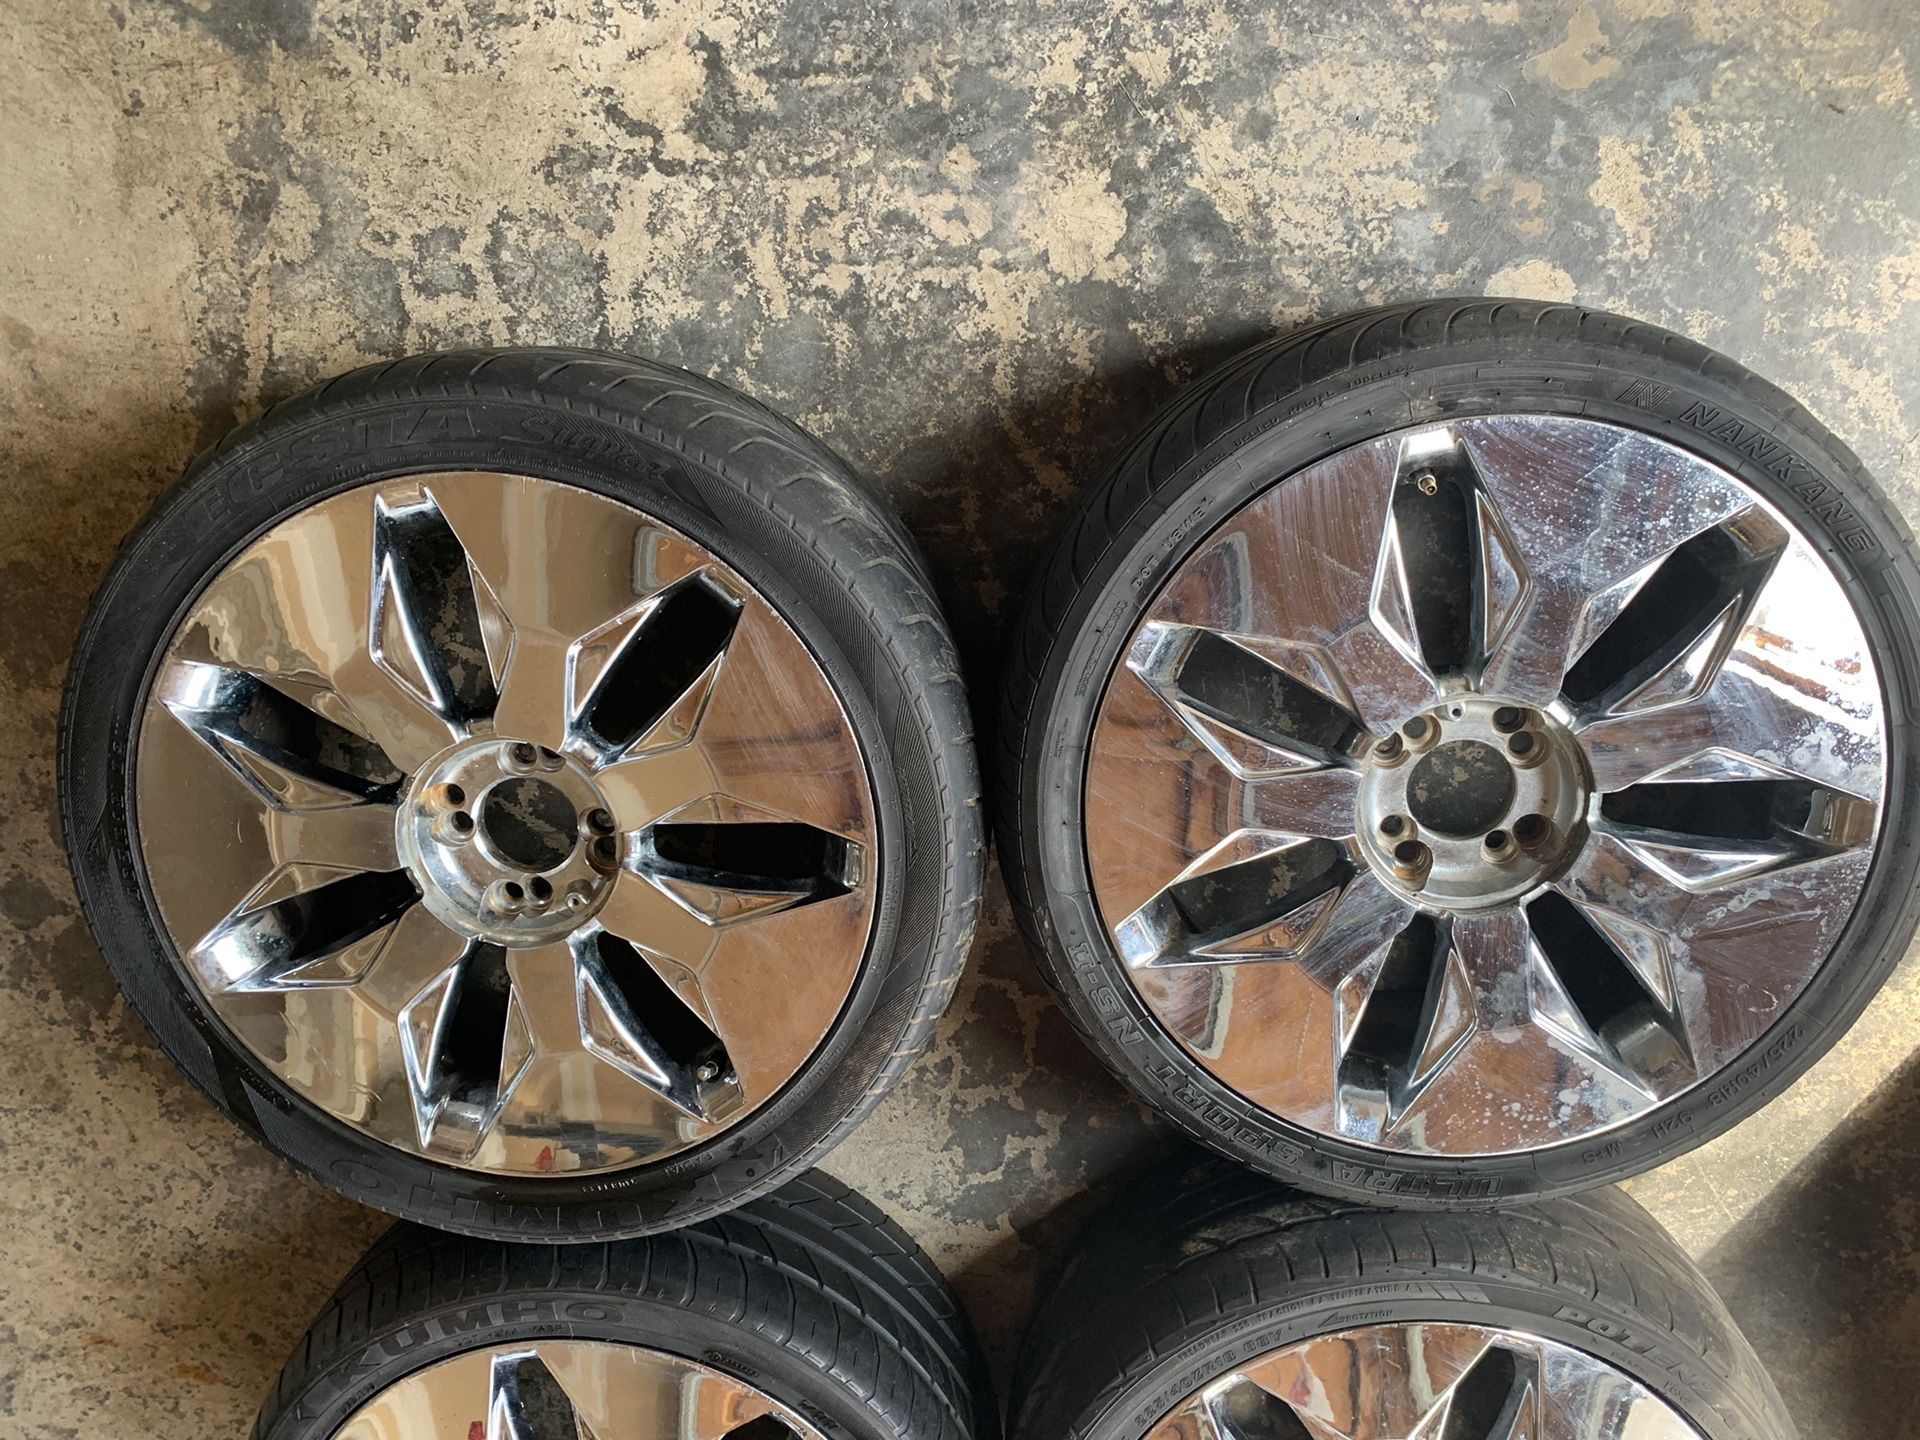 Four 4 lug universal 18 inch chrome mirror rims with 225/40zr18 inch tires on all four rims